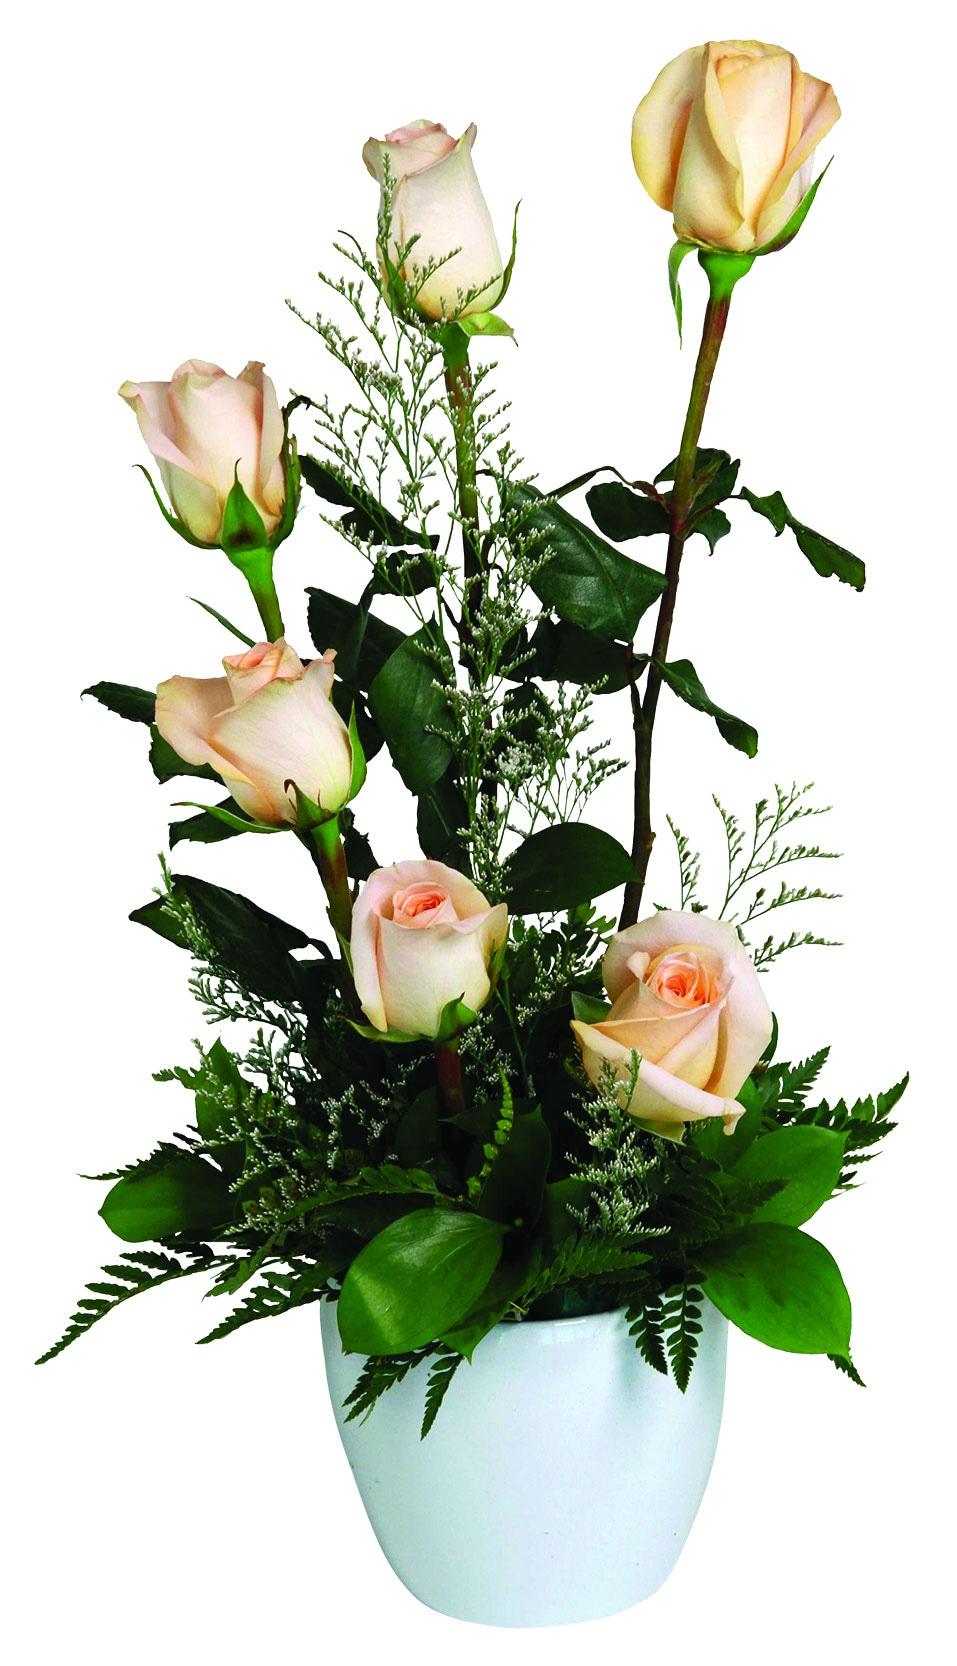 A fresh arrangement with a spiral of pink roses, greens and fillers.